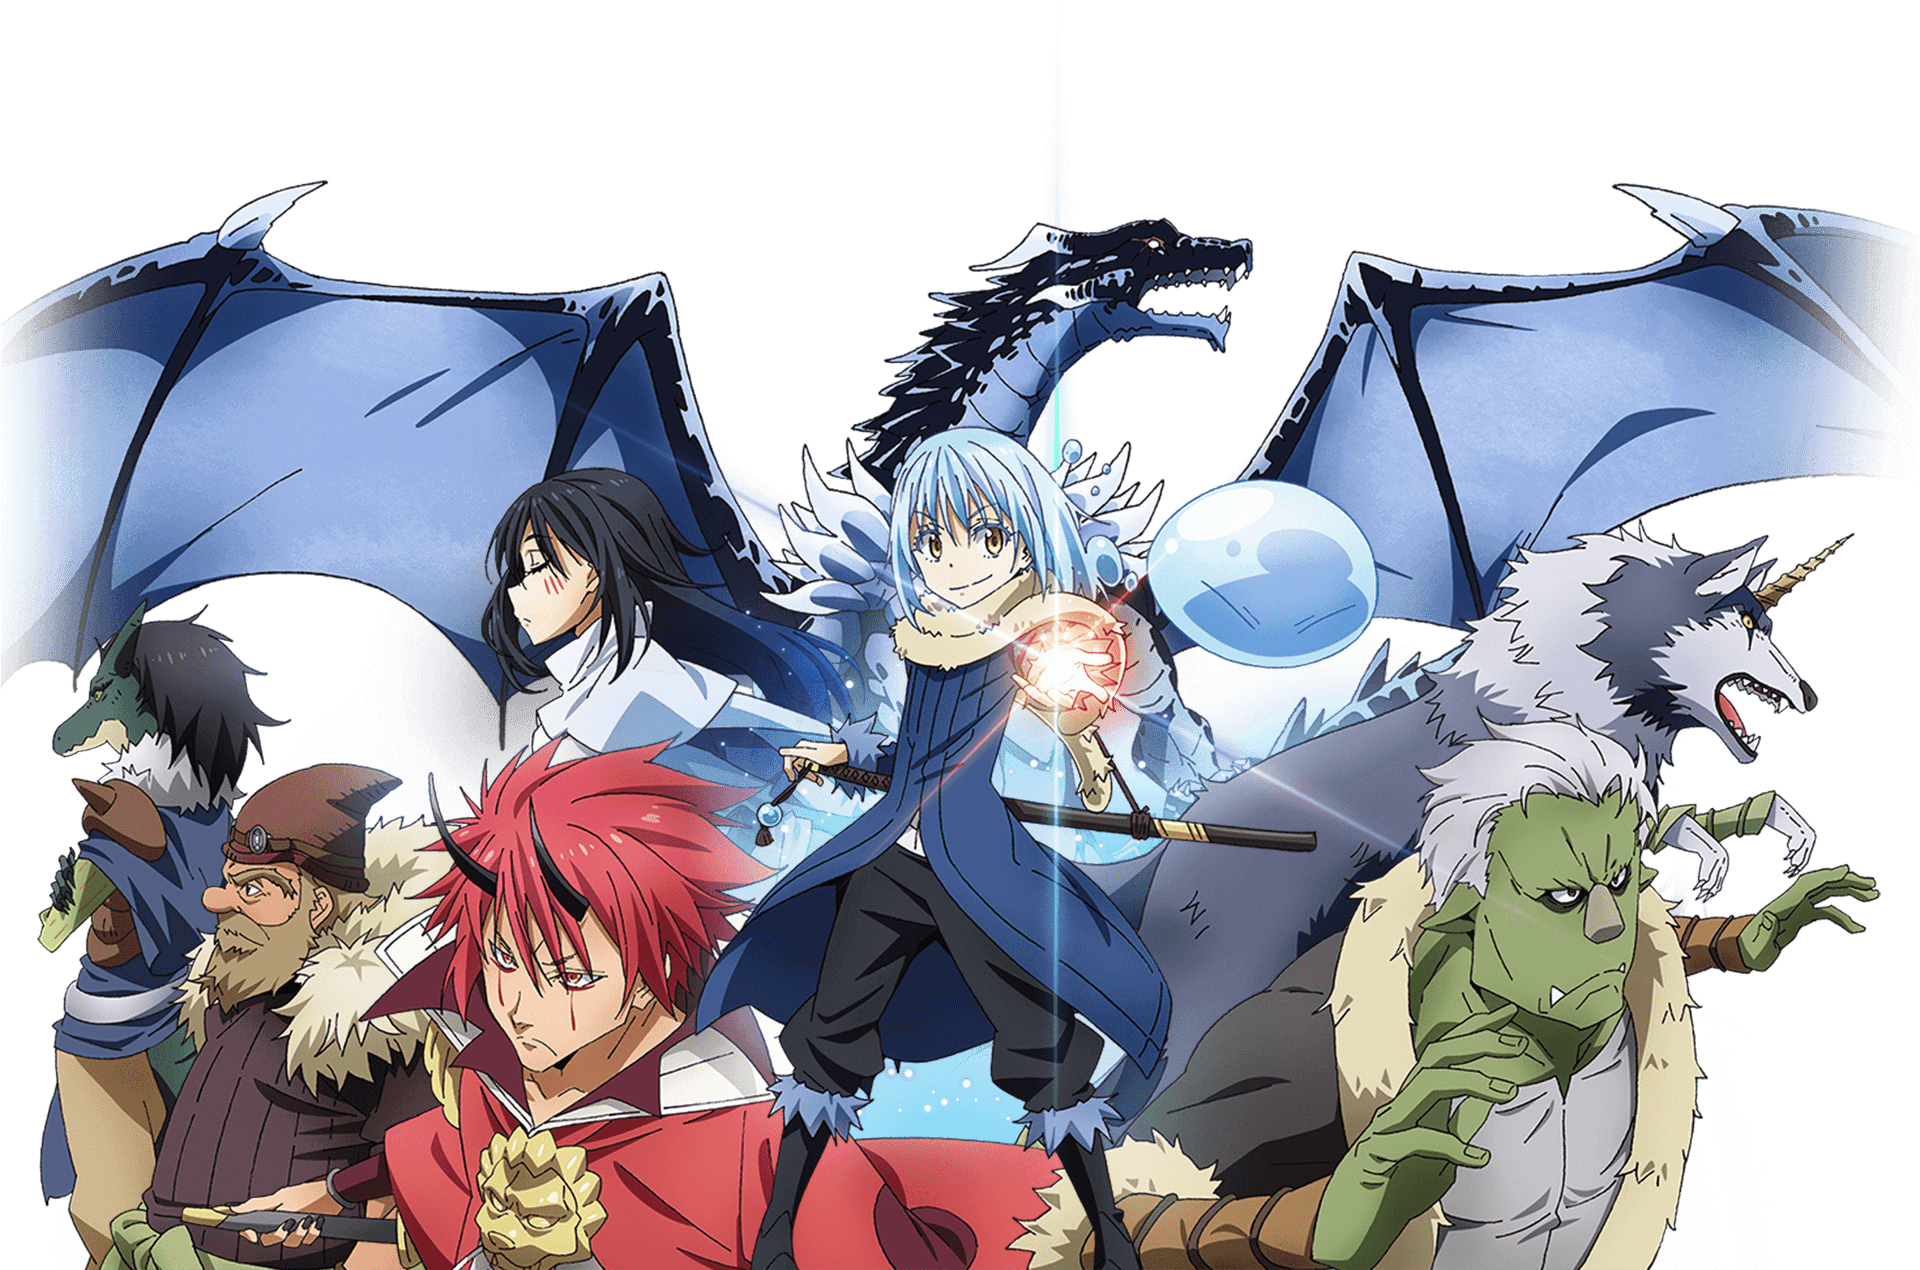 Uncanny Transformation: Rimuru Tempest In 'that Time I Got Reincarnated As A Slime'